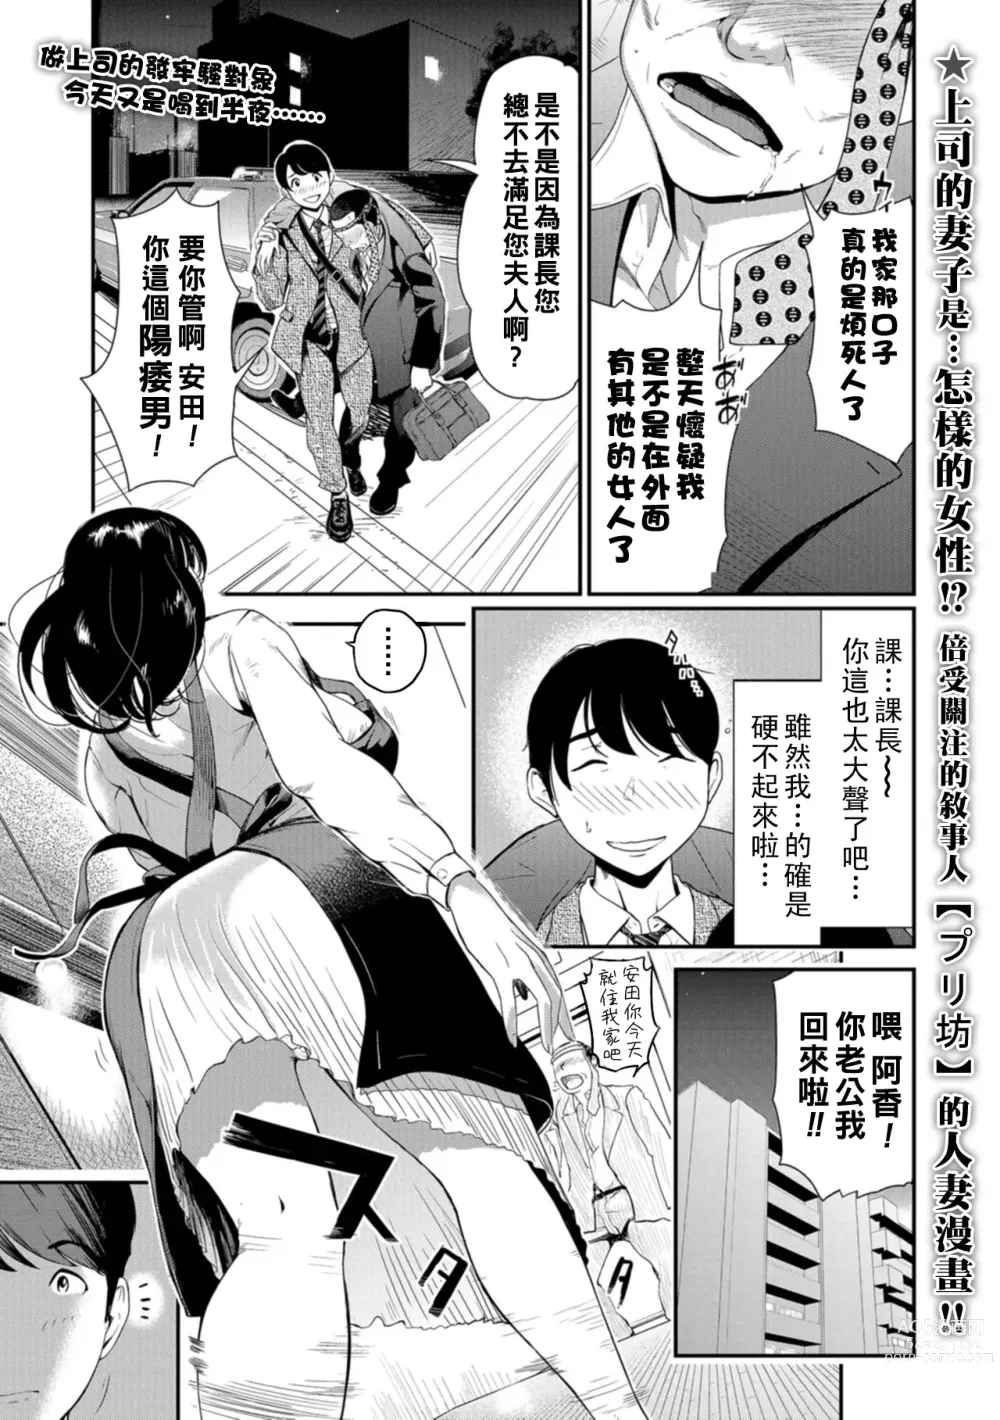 Page 1 of manga Mission In Pussy